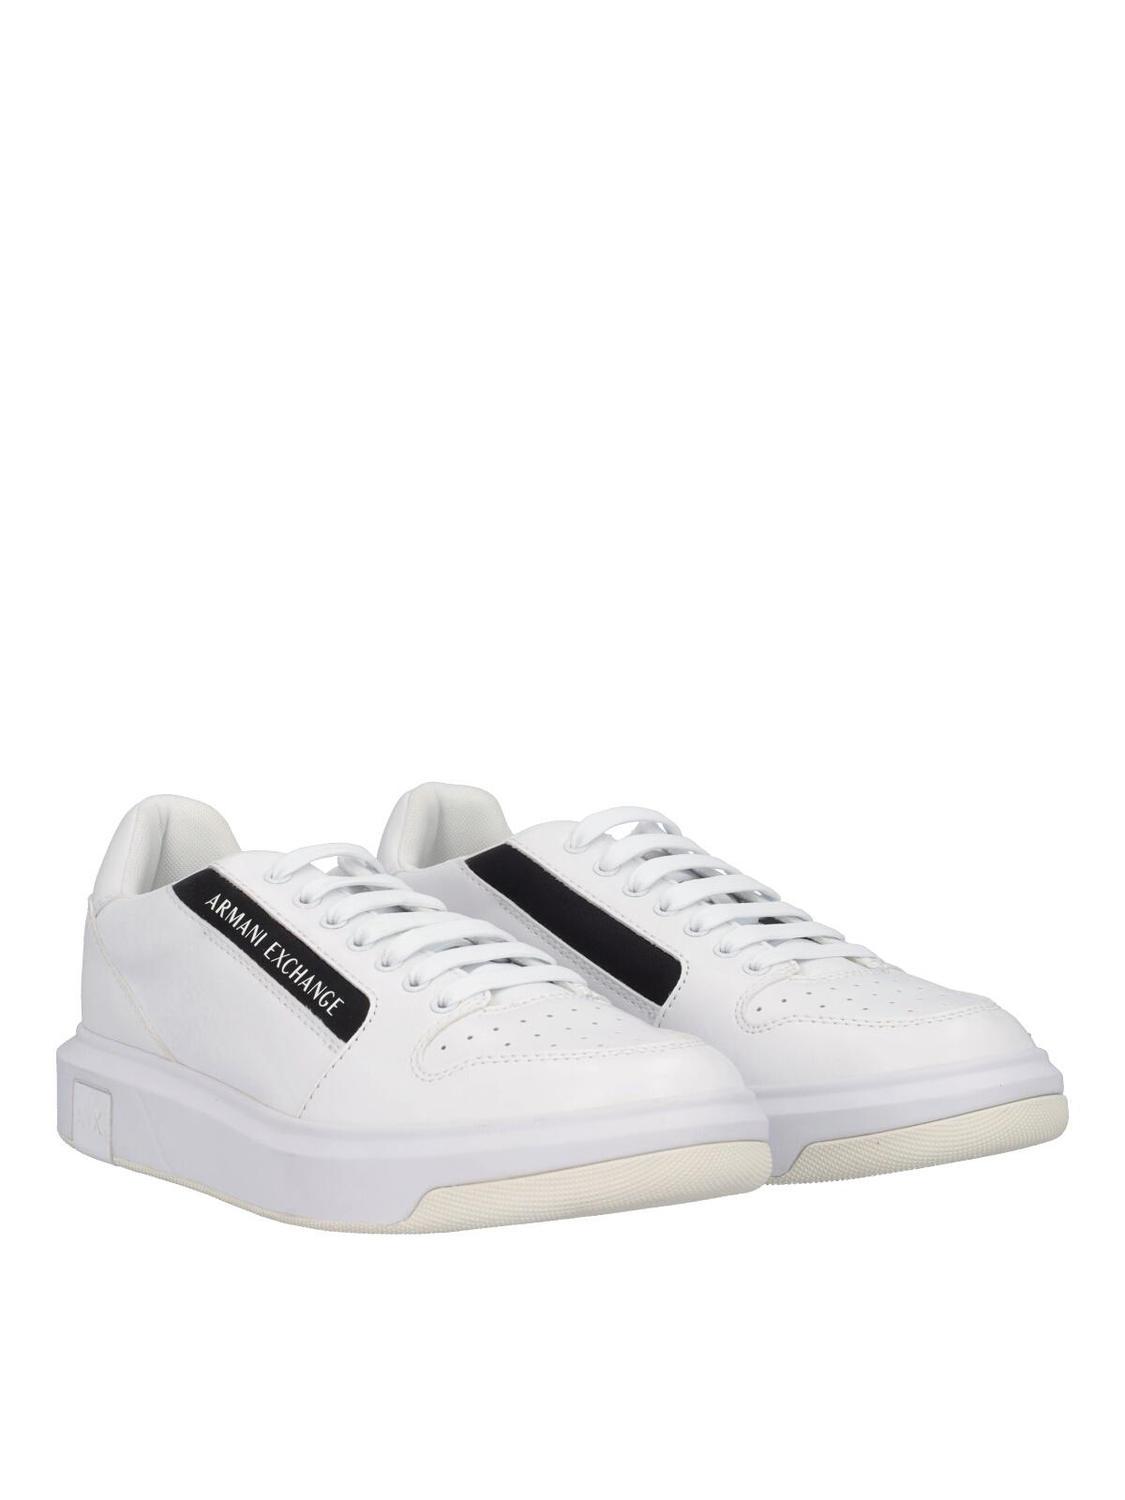 Armani Exchange Lateral Logo Sneakers Optical White+Black - Buy At Outlet  Prices!